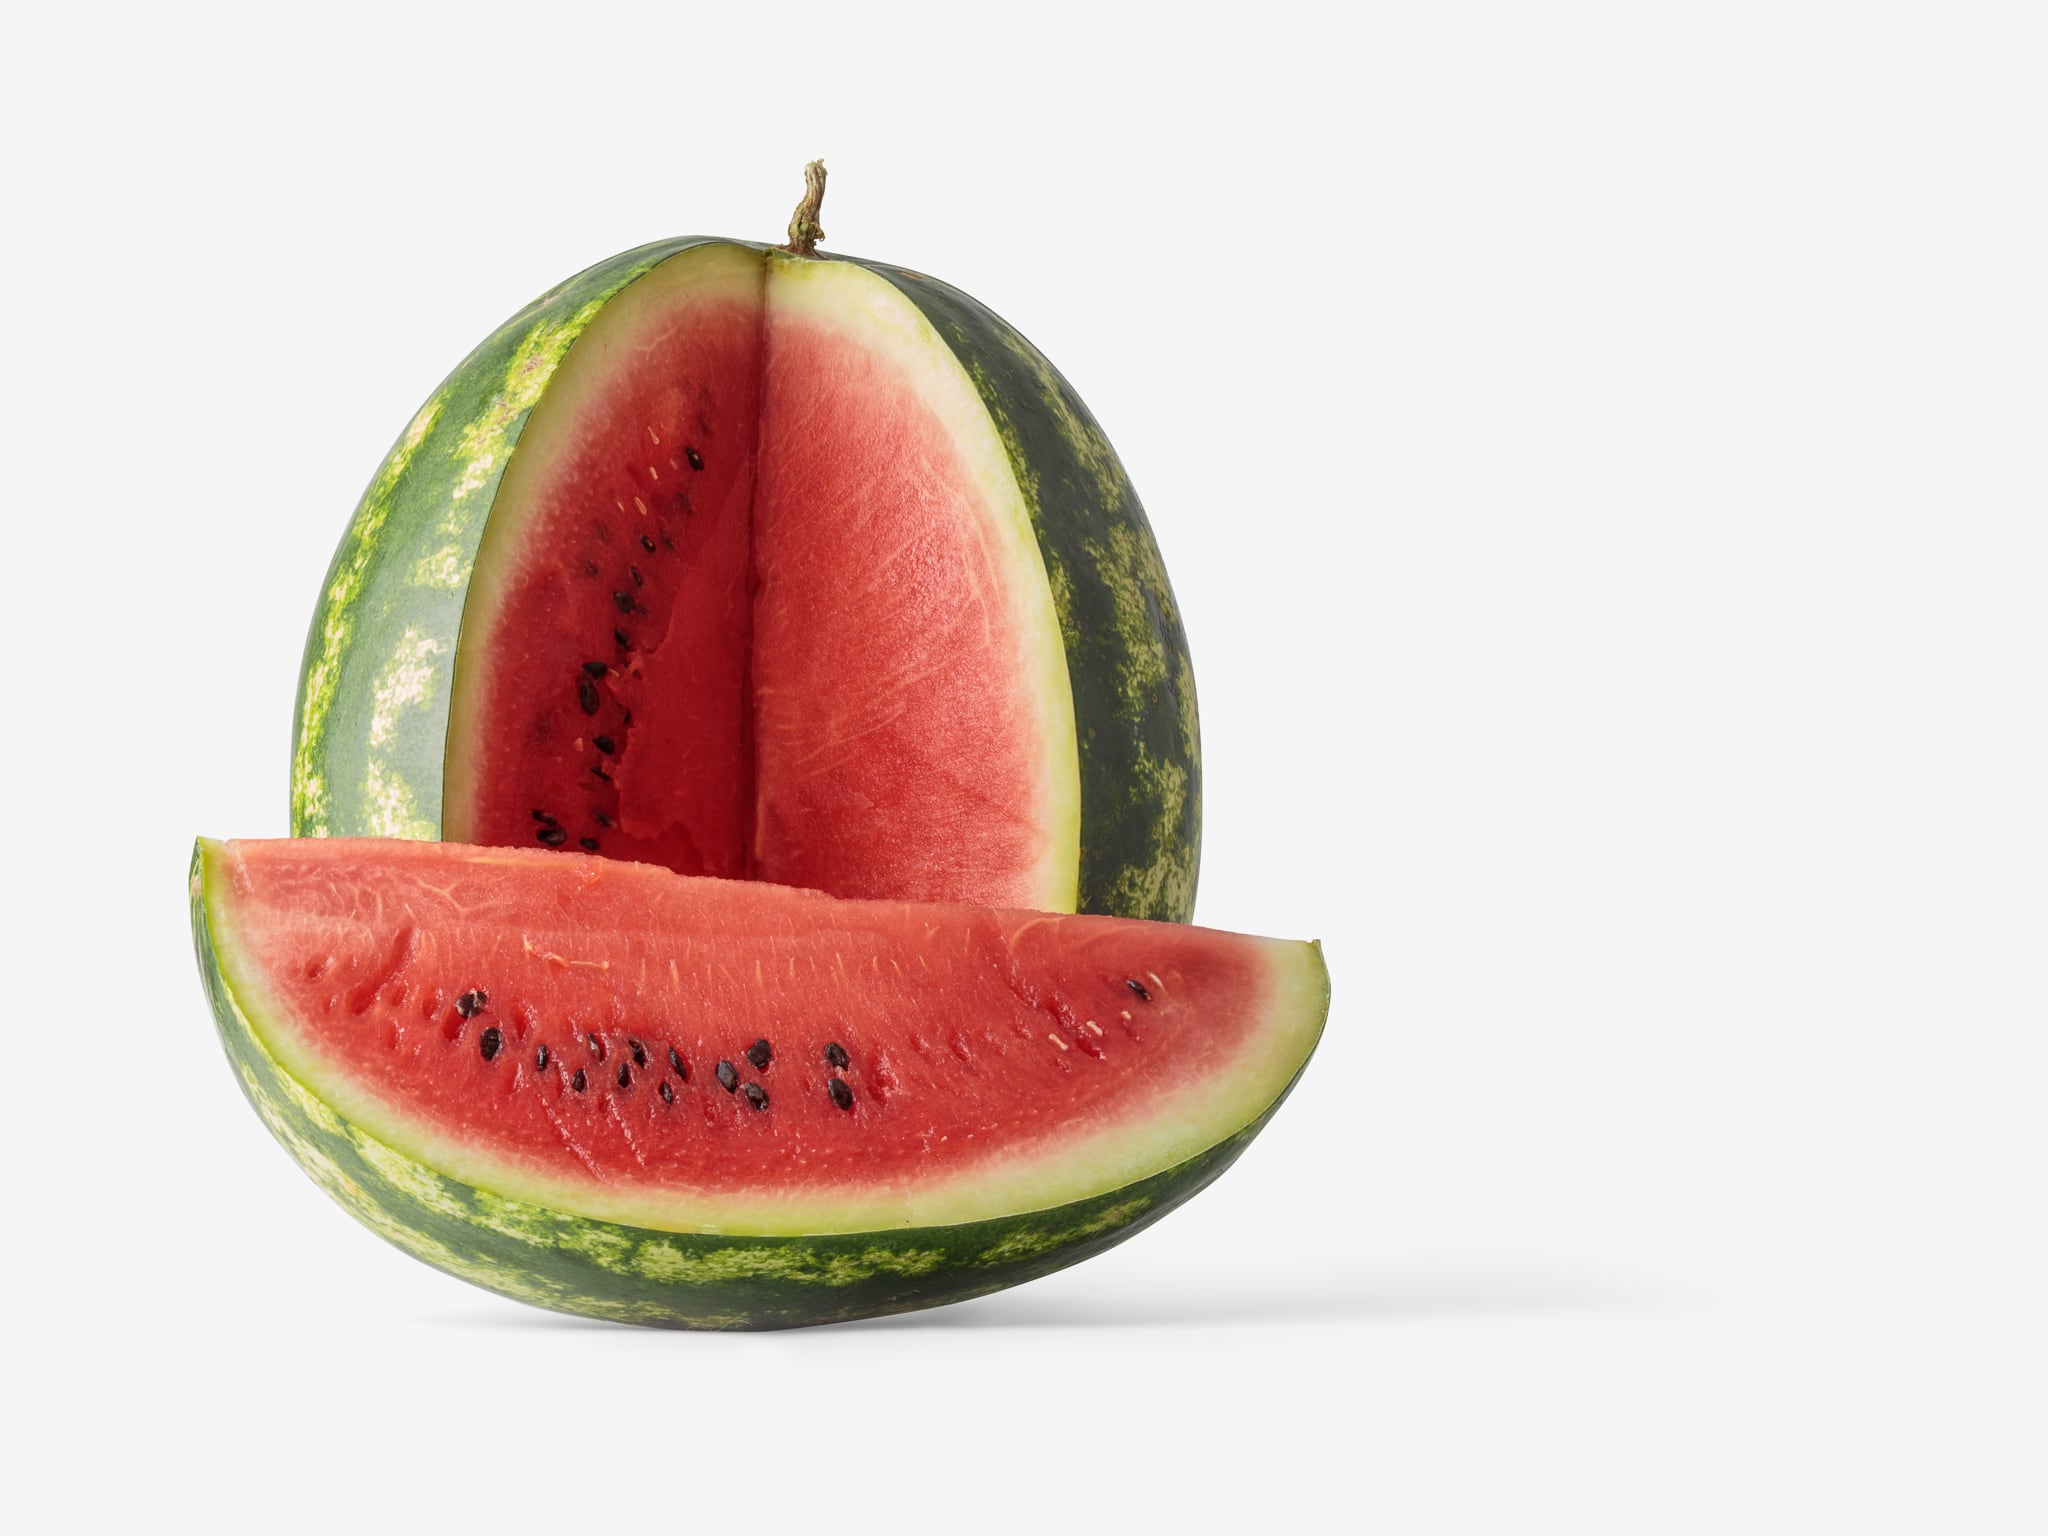 Watermelon image with transparent background